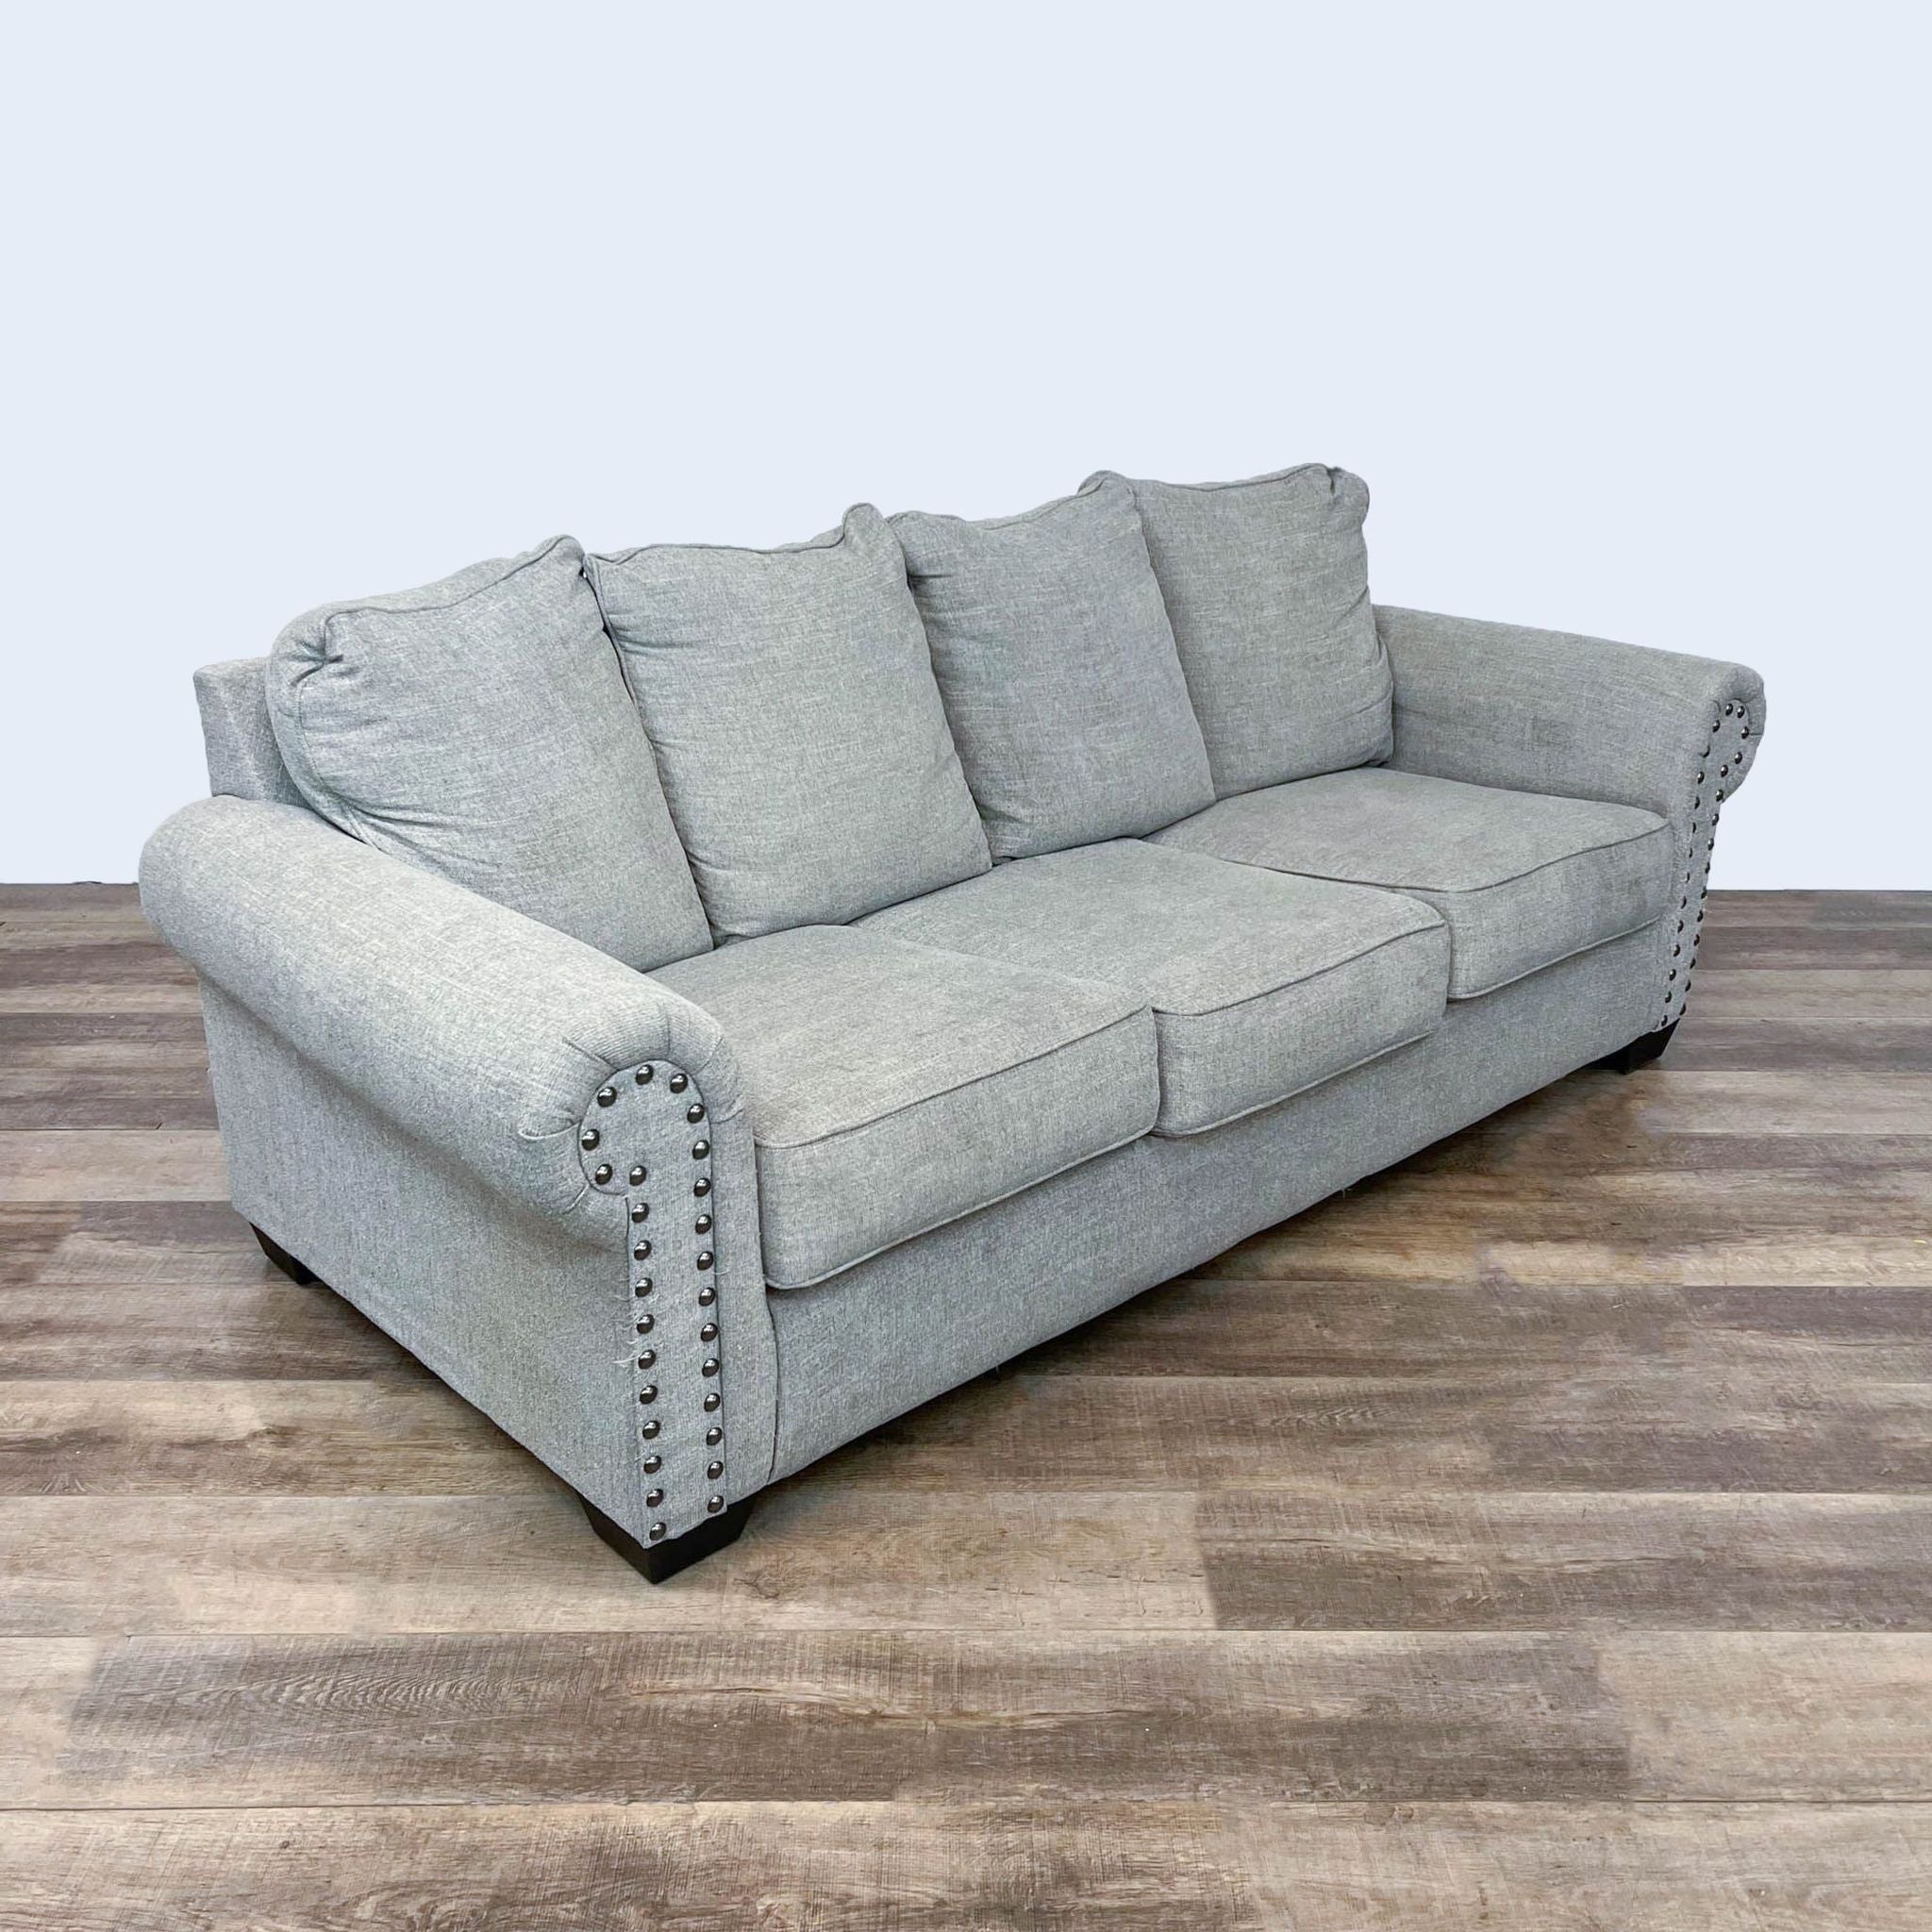 Ashley Furniture gray roll arm sleeper sofa with queen mattress and nailhead details on a wooden floor.